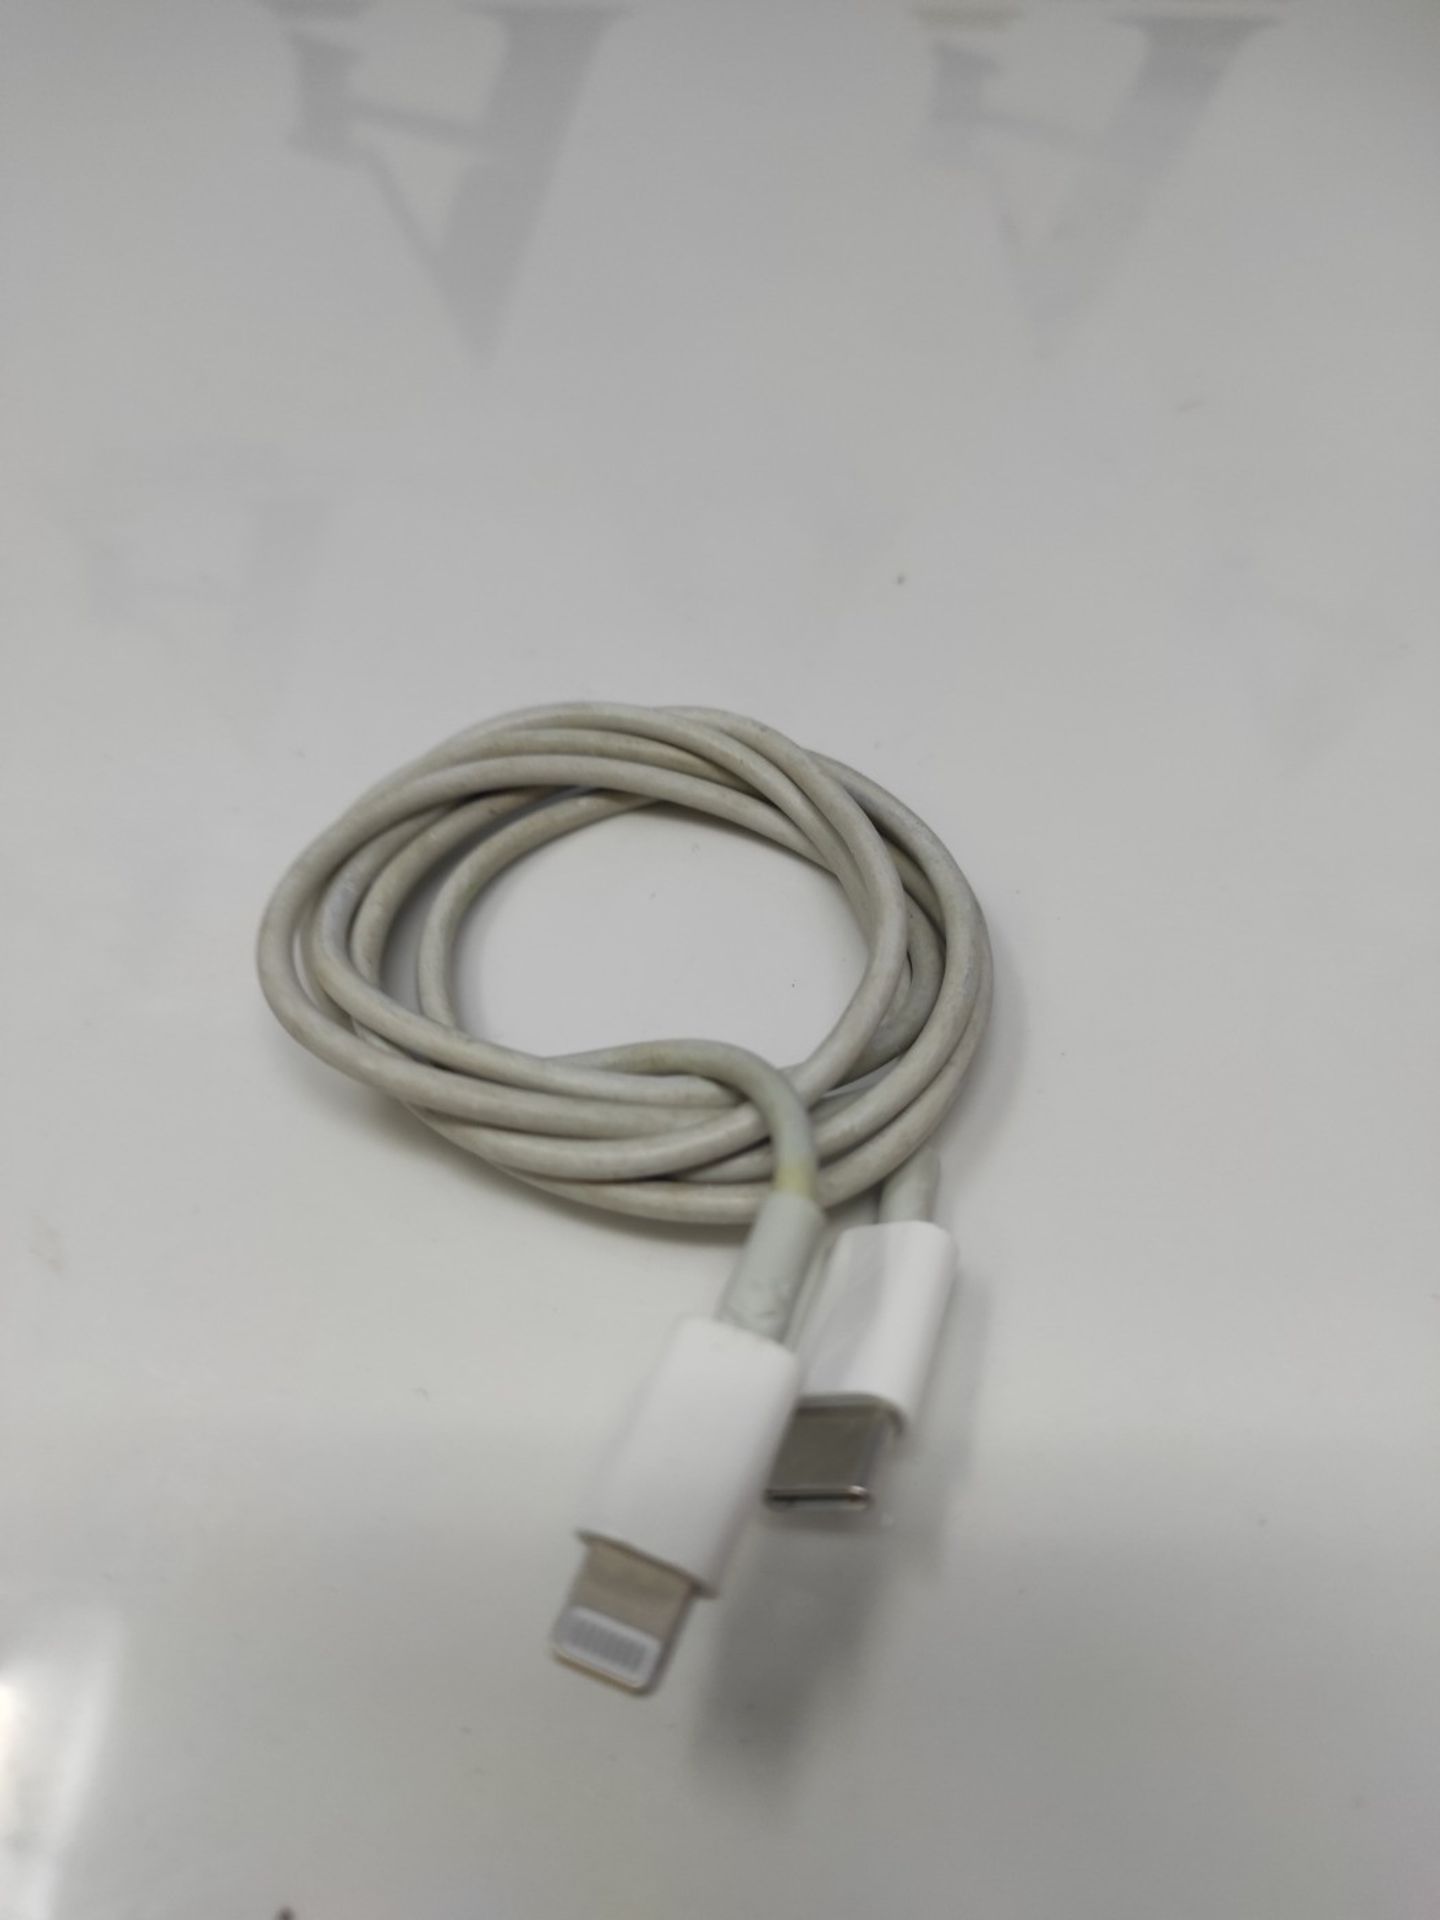 Apple Lightning to USB-C Cable (1m), Tablet - Image 6 of 6